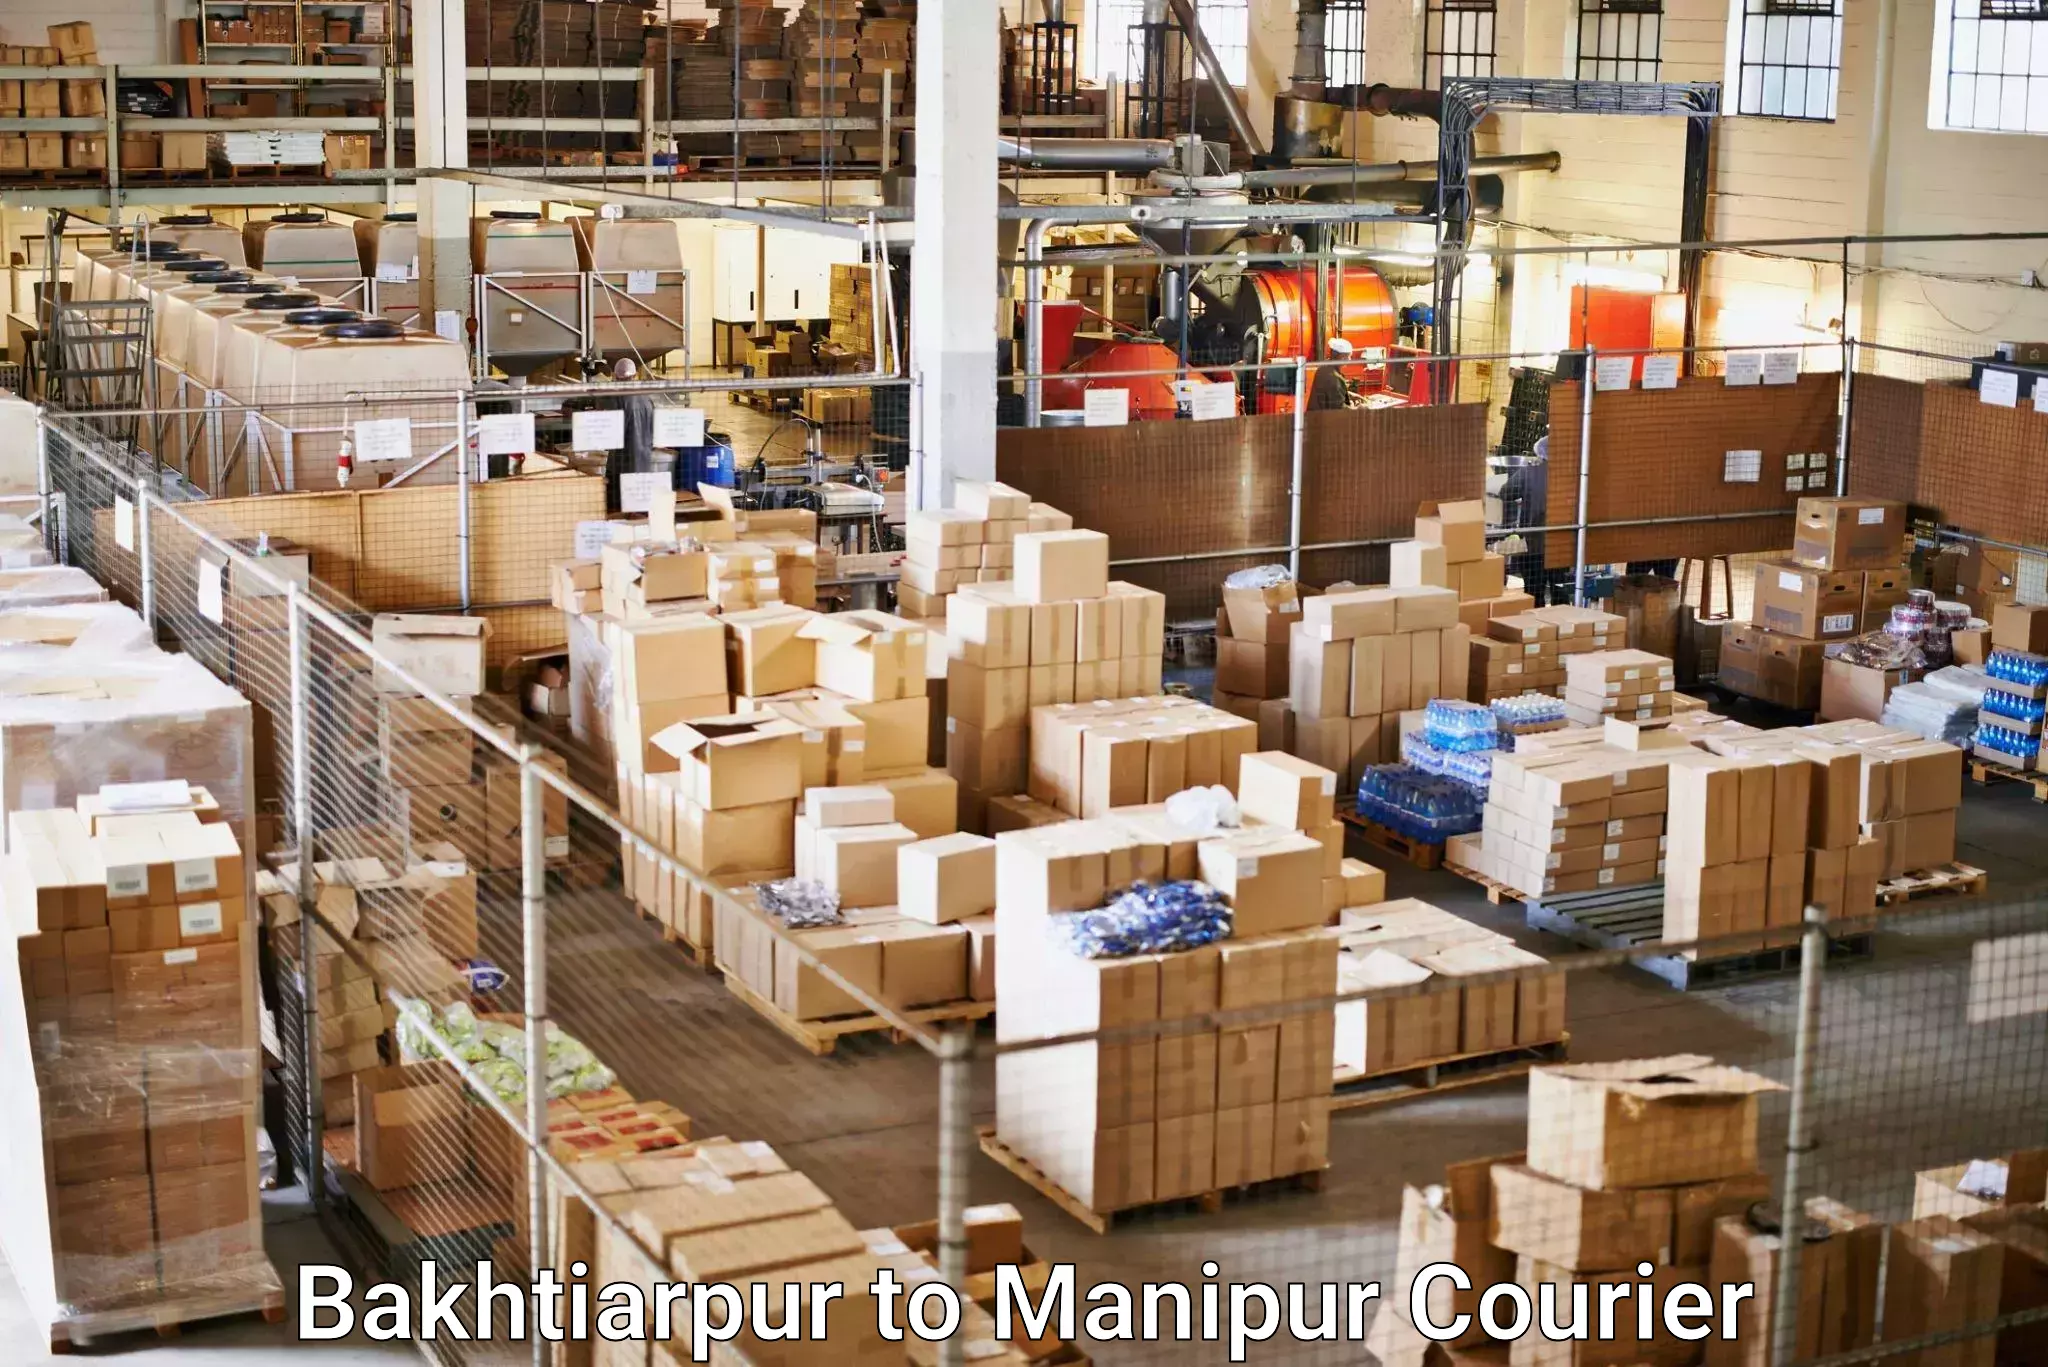 24-hour delivery options Bakhtiarpur to Manipur